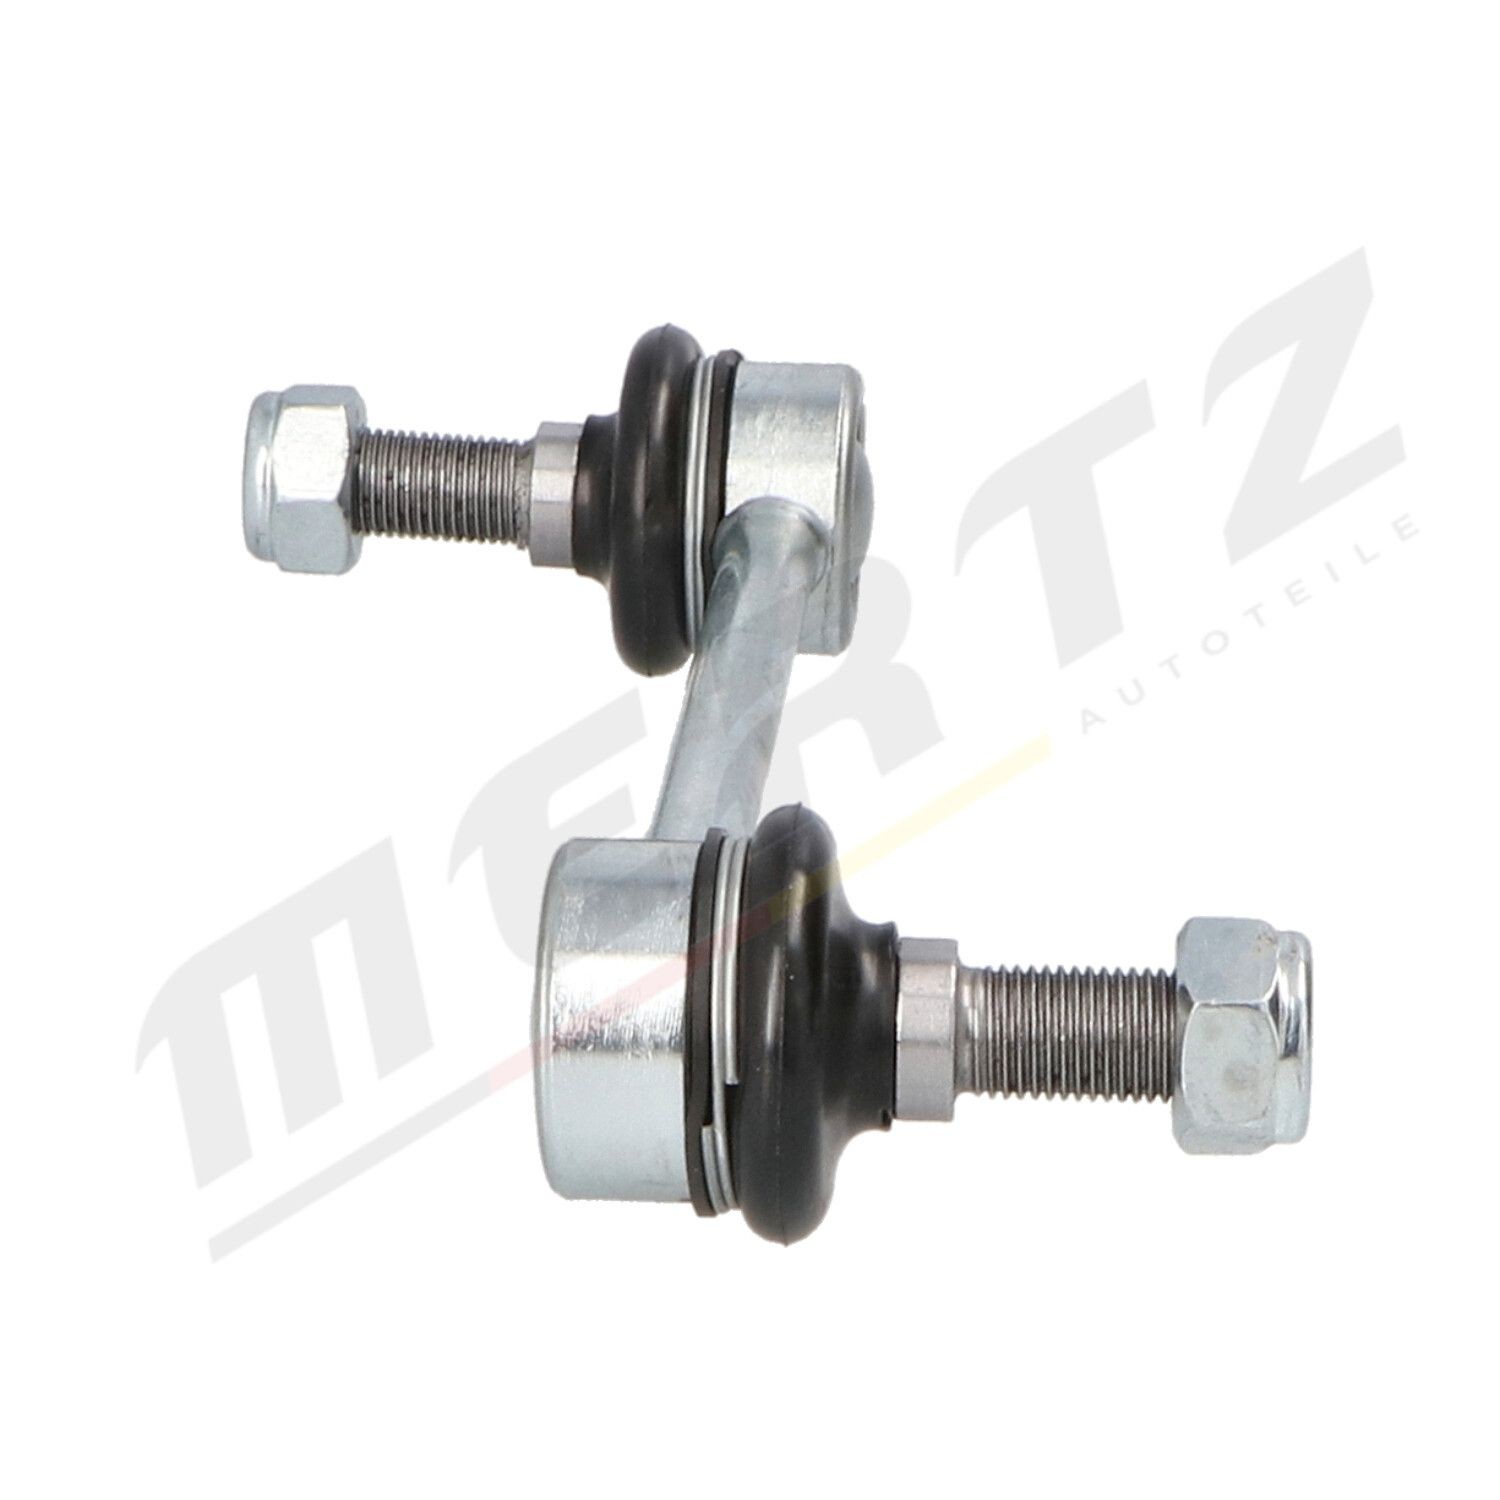 MS1763 Anti-roll bar links MERTZ M-S1763 review and test